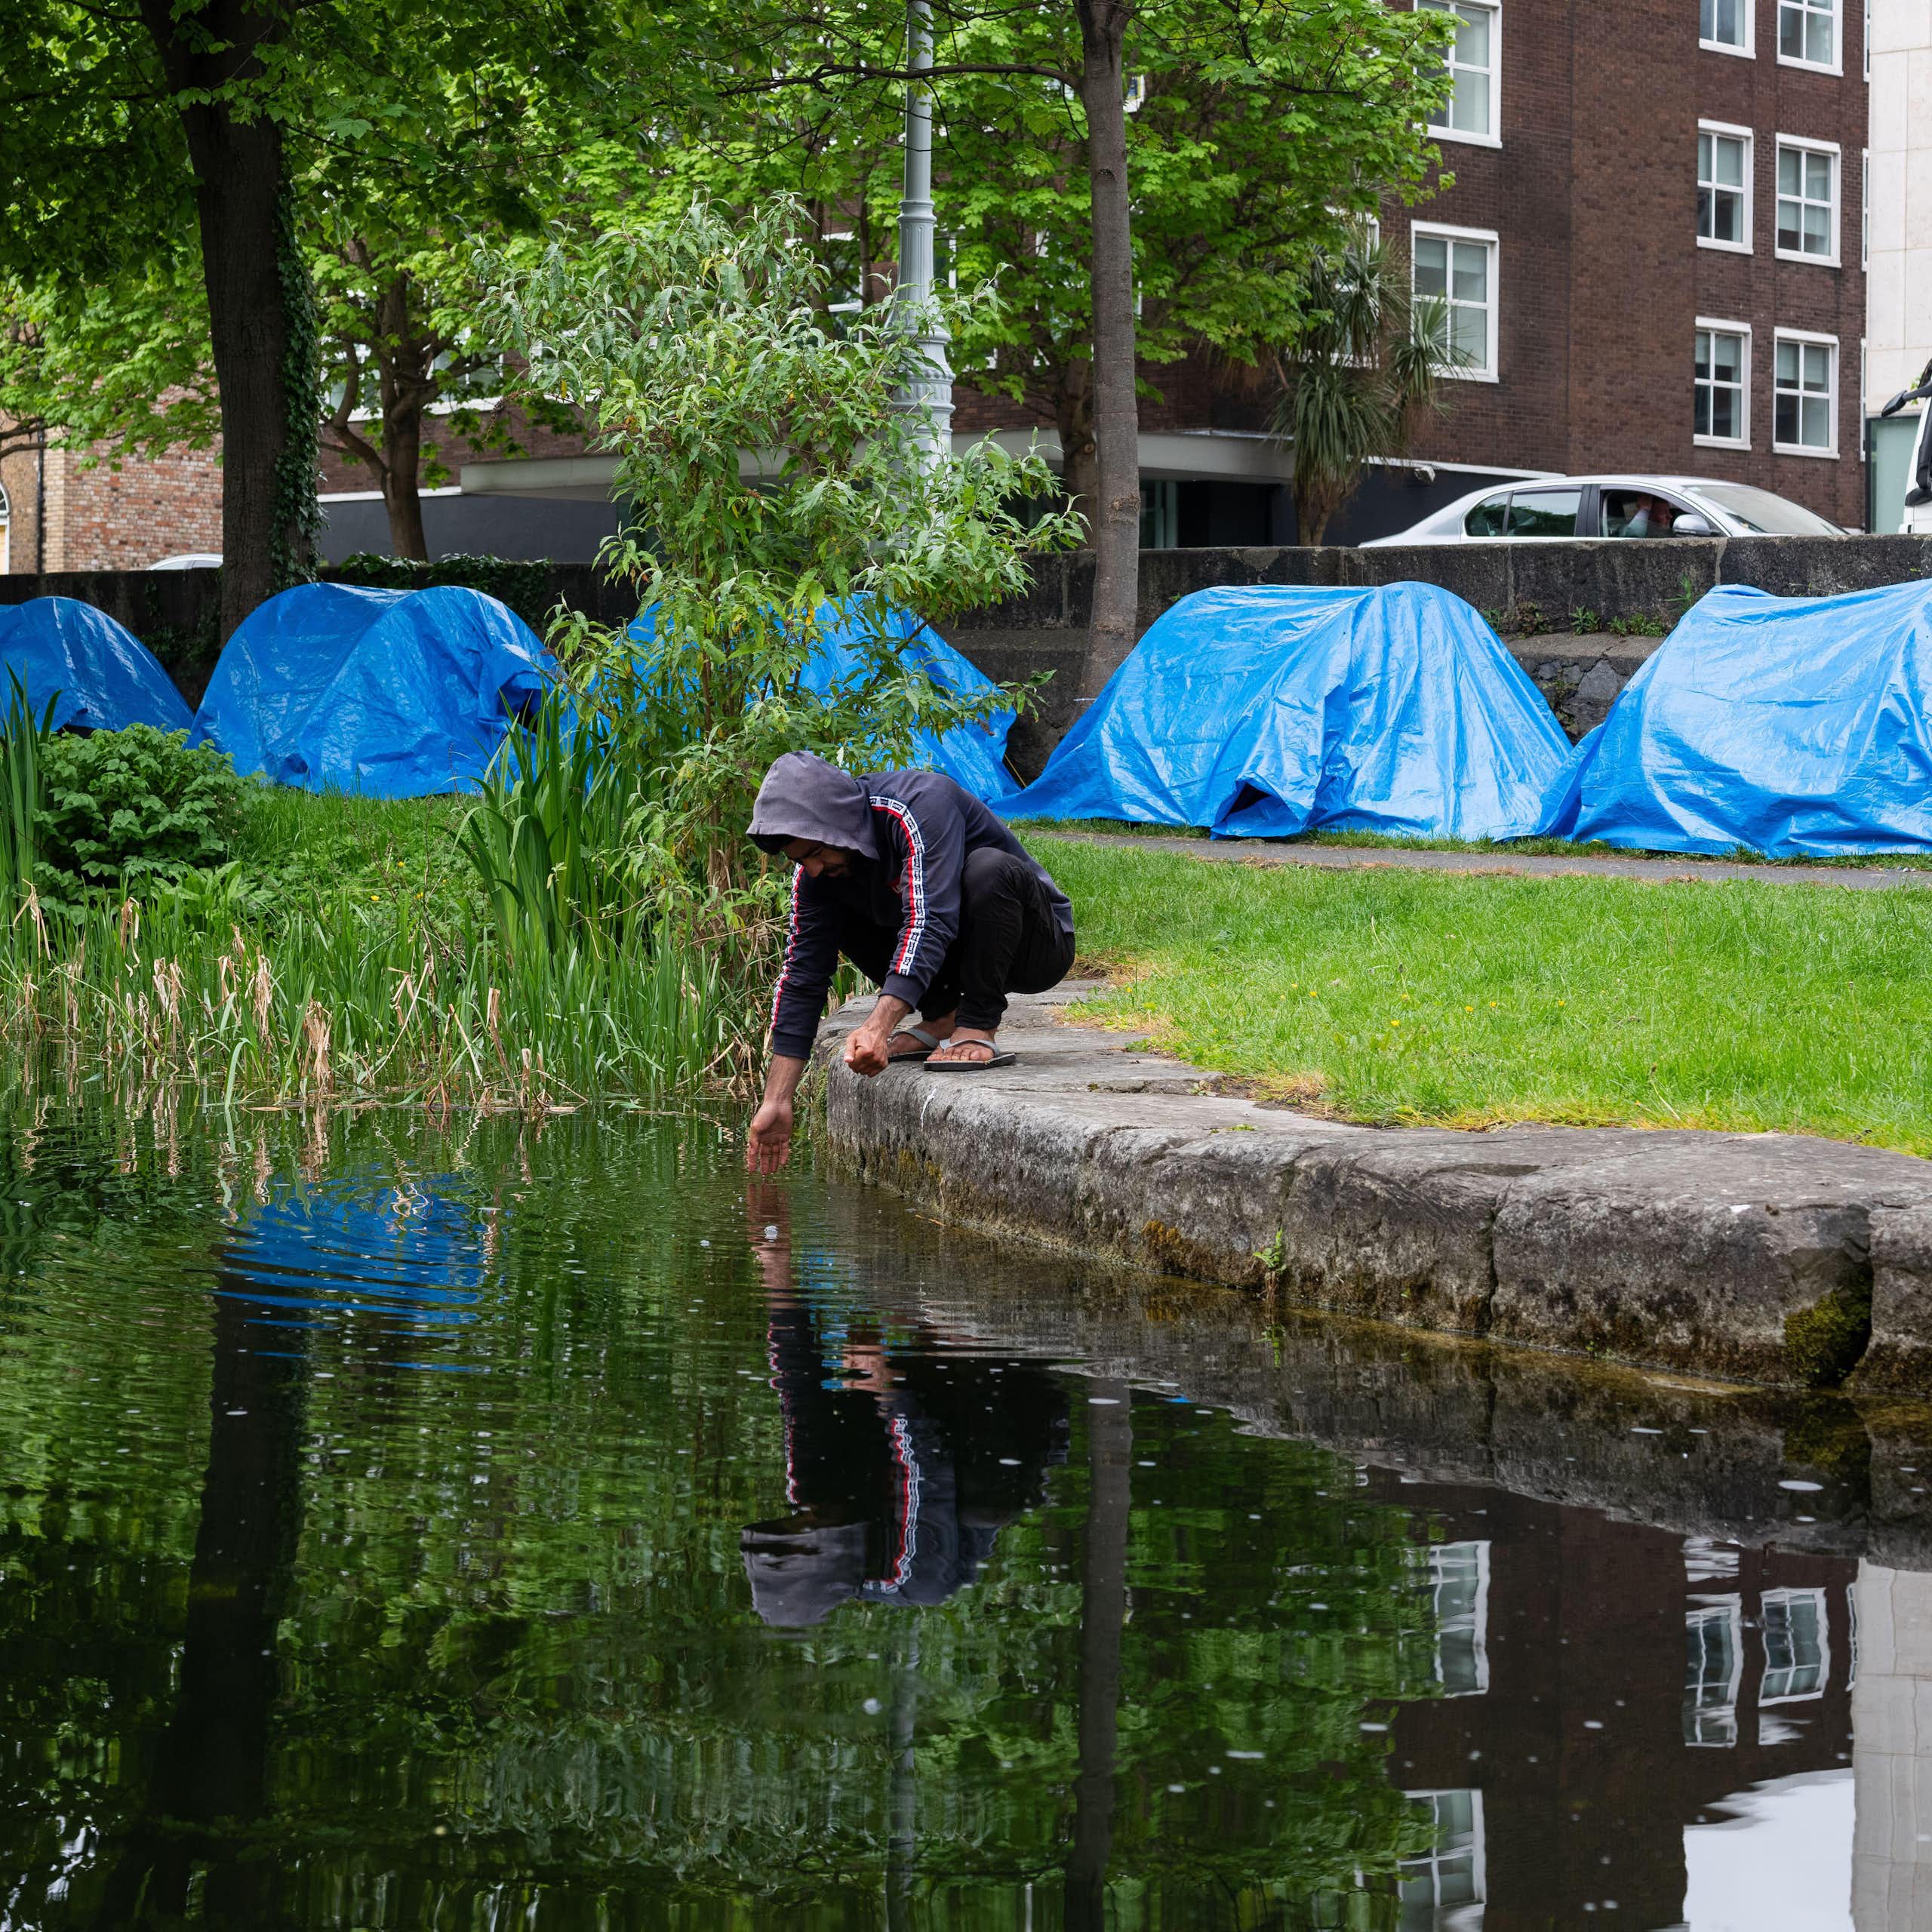 A man squats next to the Grand Canal in Dublin and washes his hands, while a row of blue tents is visible behind him on the canal bank